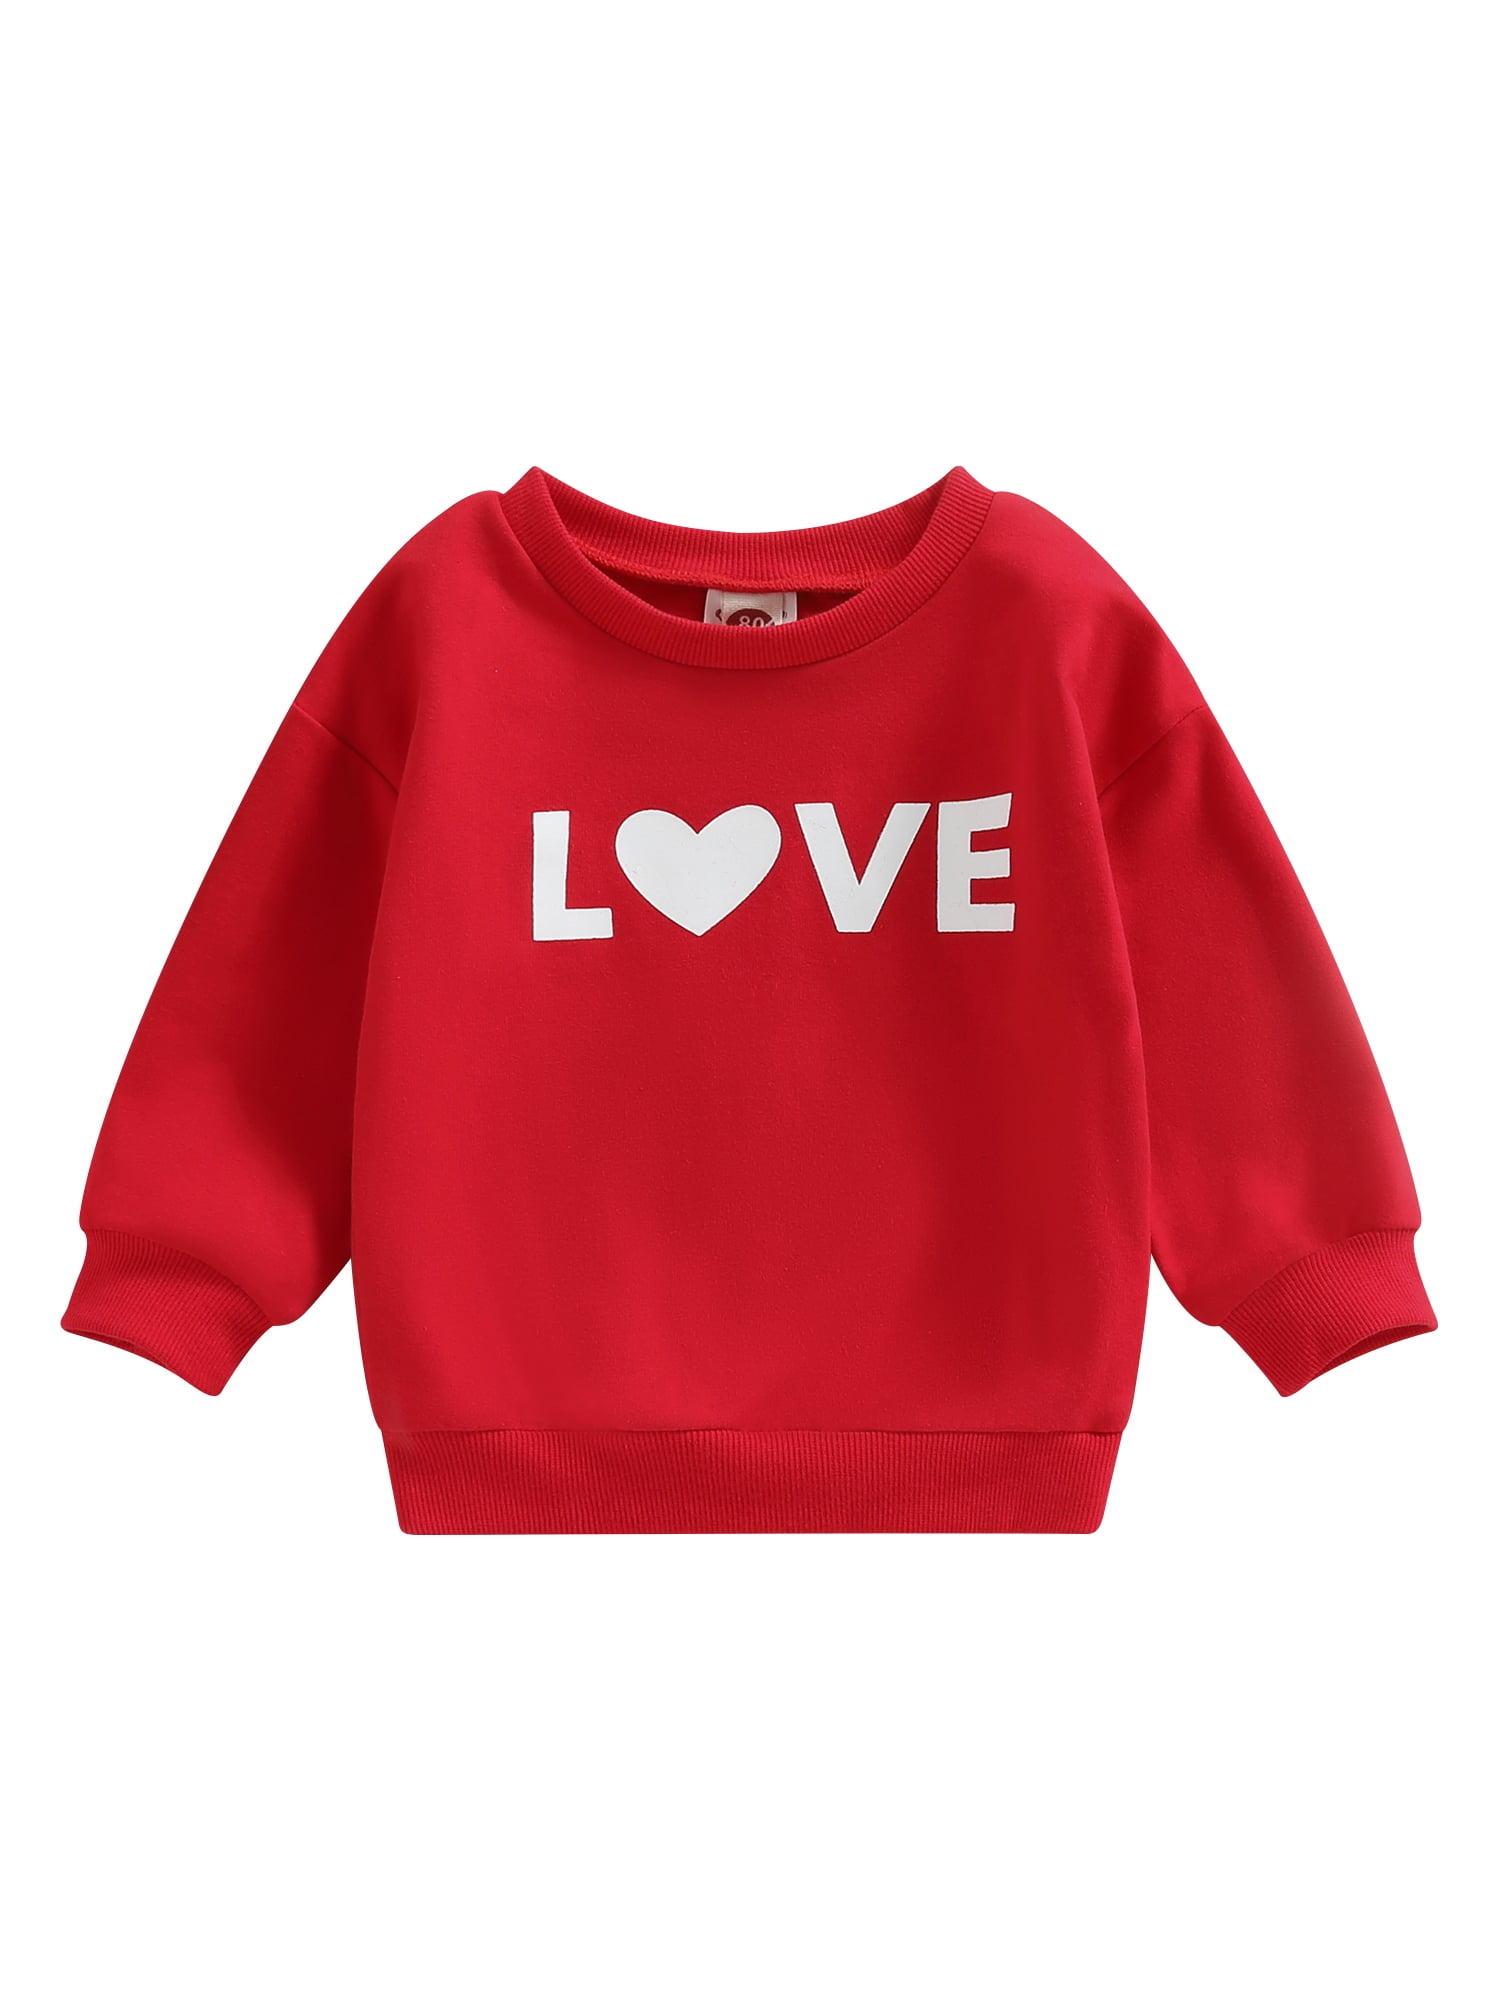 Aunavey Toddler Baby Boys Valentine\'s Spring Day Pullover Heart Your Top Clothes Sweatshirt MR. Girls Steal